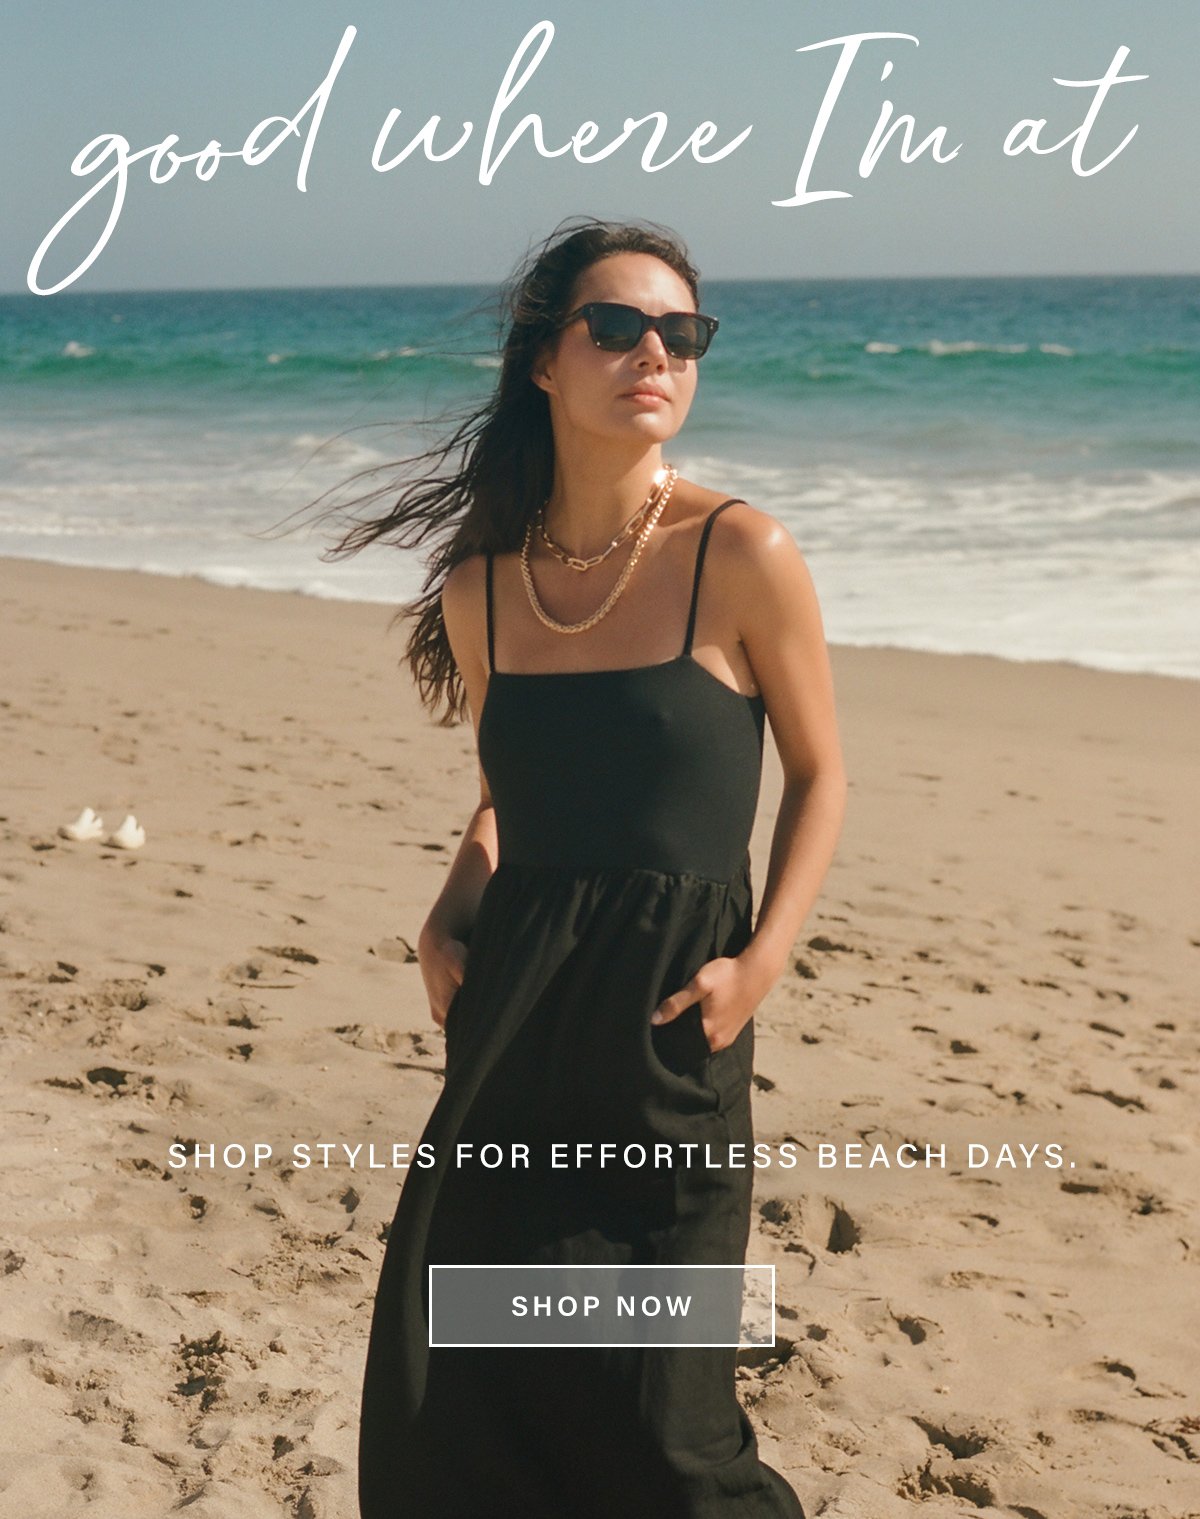 good where i'm at. shop styles for effortless beach days. shop now.